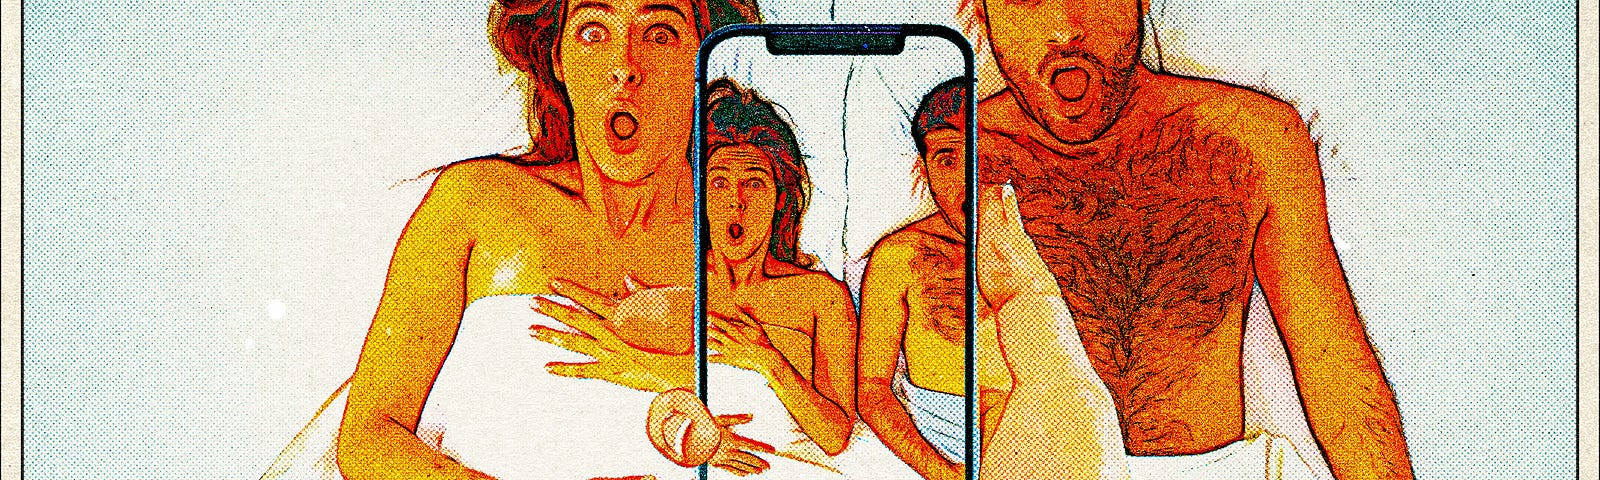 couple in bed caught on iPhone camera